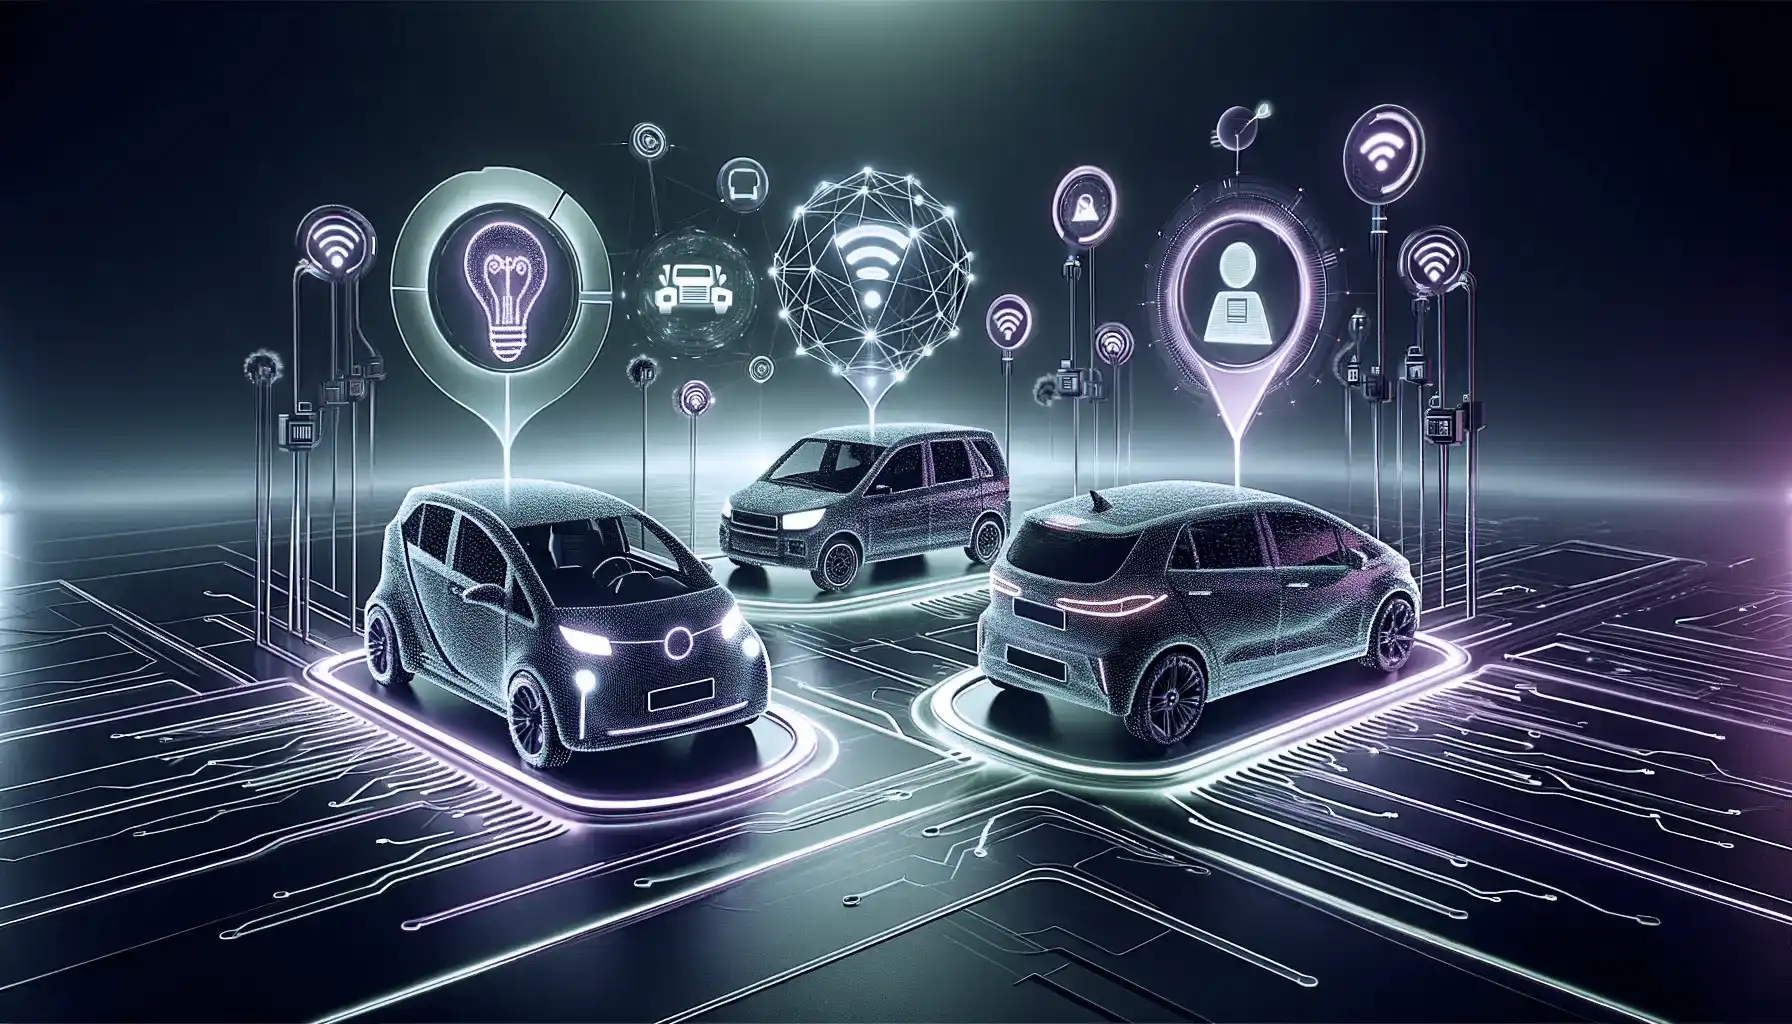 Image depicting connected vehicle solutions, emphasizing IoT, AI, and data analytics technologies, illuminated in neon green and purple lights. Modern vehicles, equipped with advanced connectivity features, are shown interacting with their environment, symbolizing seamless data exchange and analytics. The vehicles are set against an abstract, high-tech background dominated by neon green and purple, highlighting the theme of innovative and interconnected vehicle technology